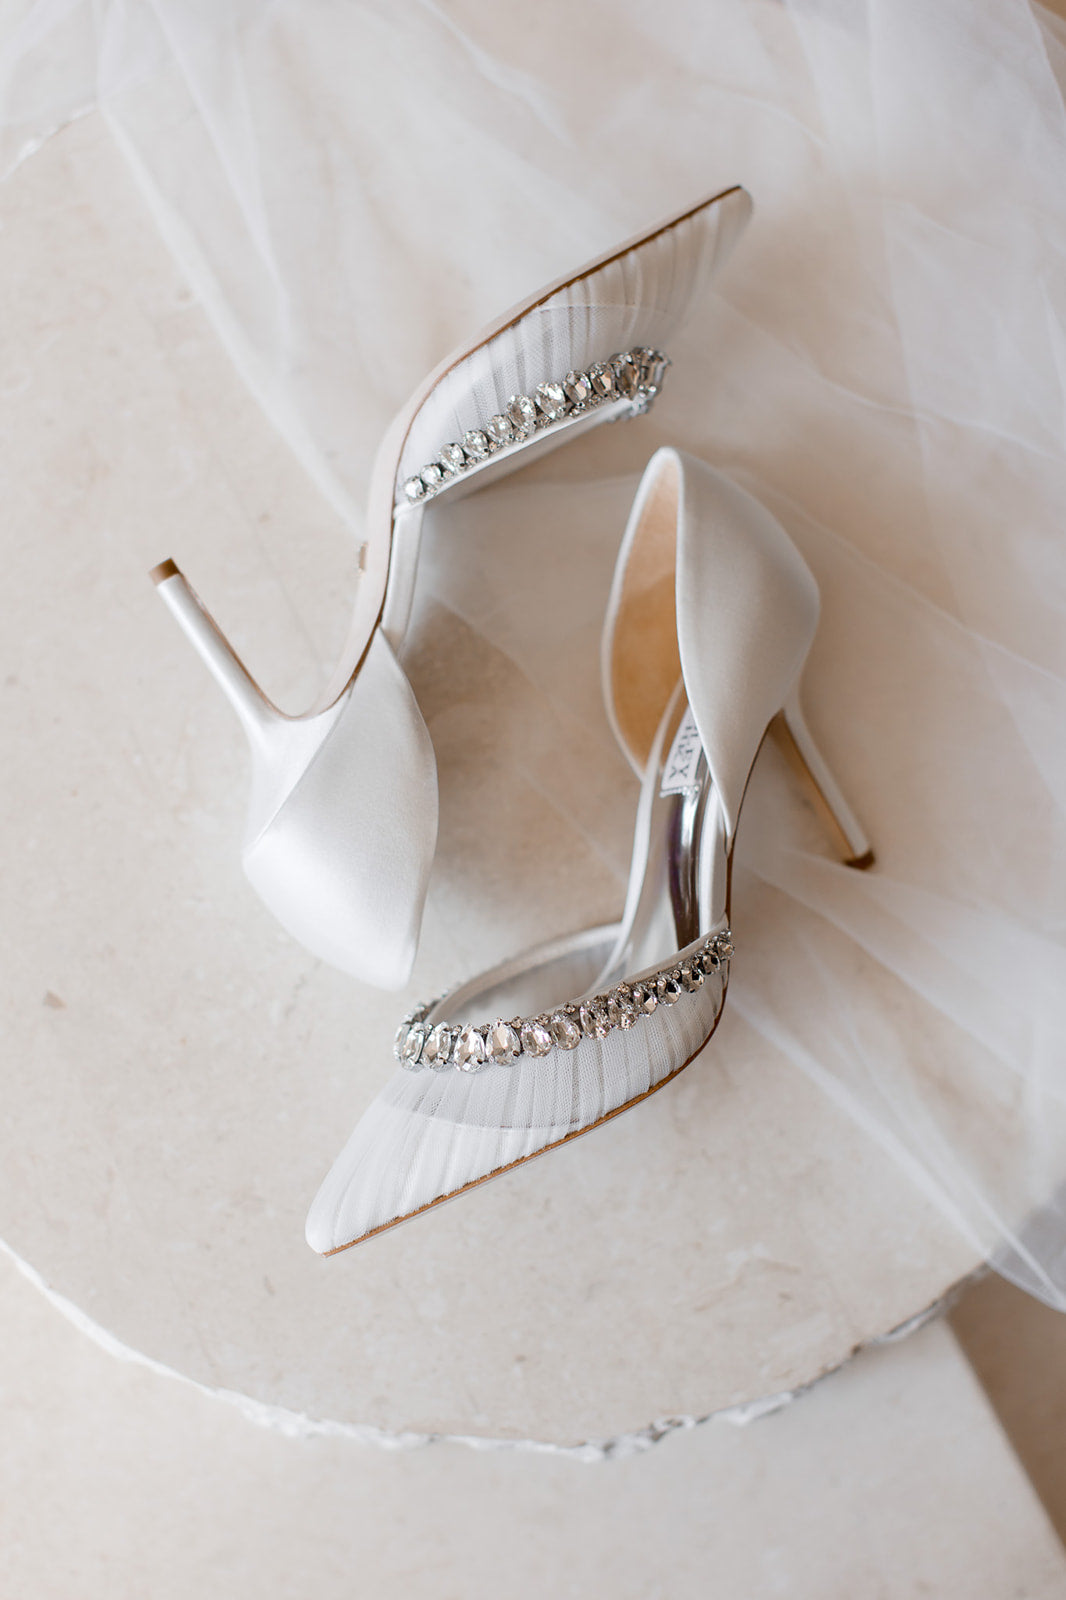 Everley - Satin & Tulle D'orsay Heels with Crystal Embellishments - Soft White